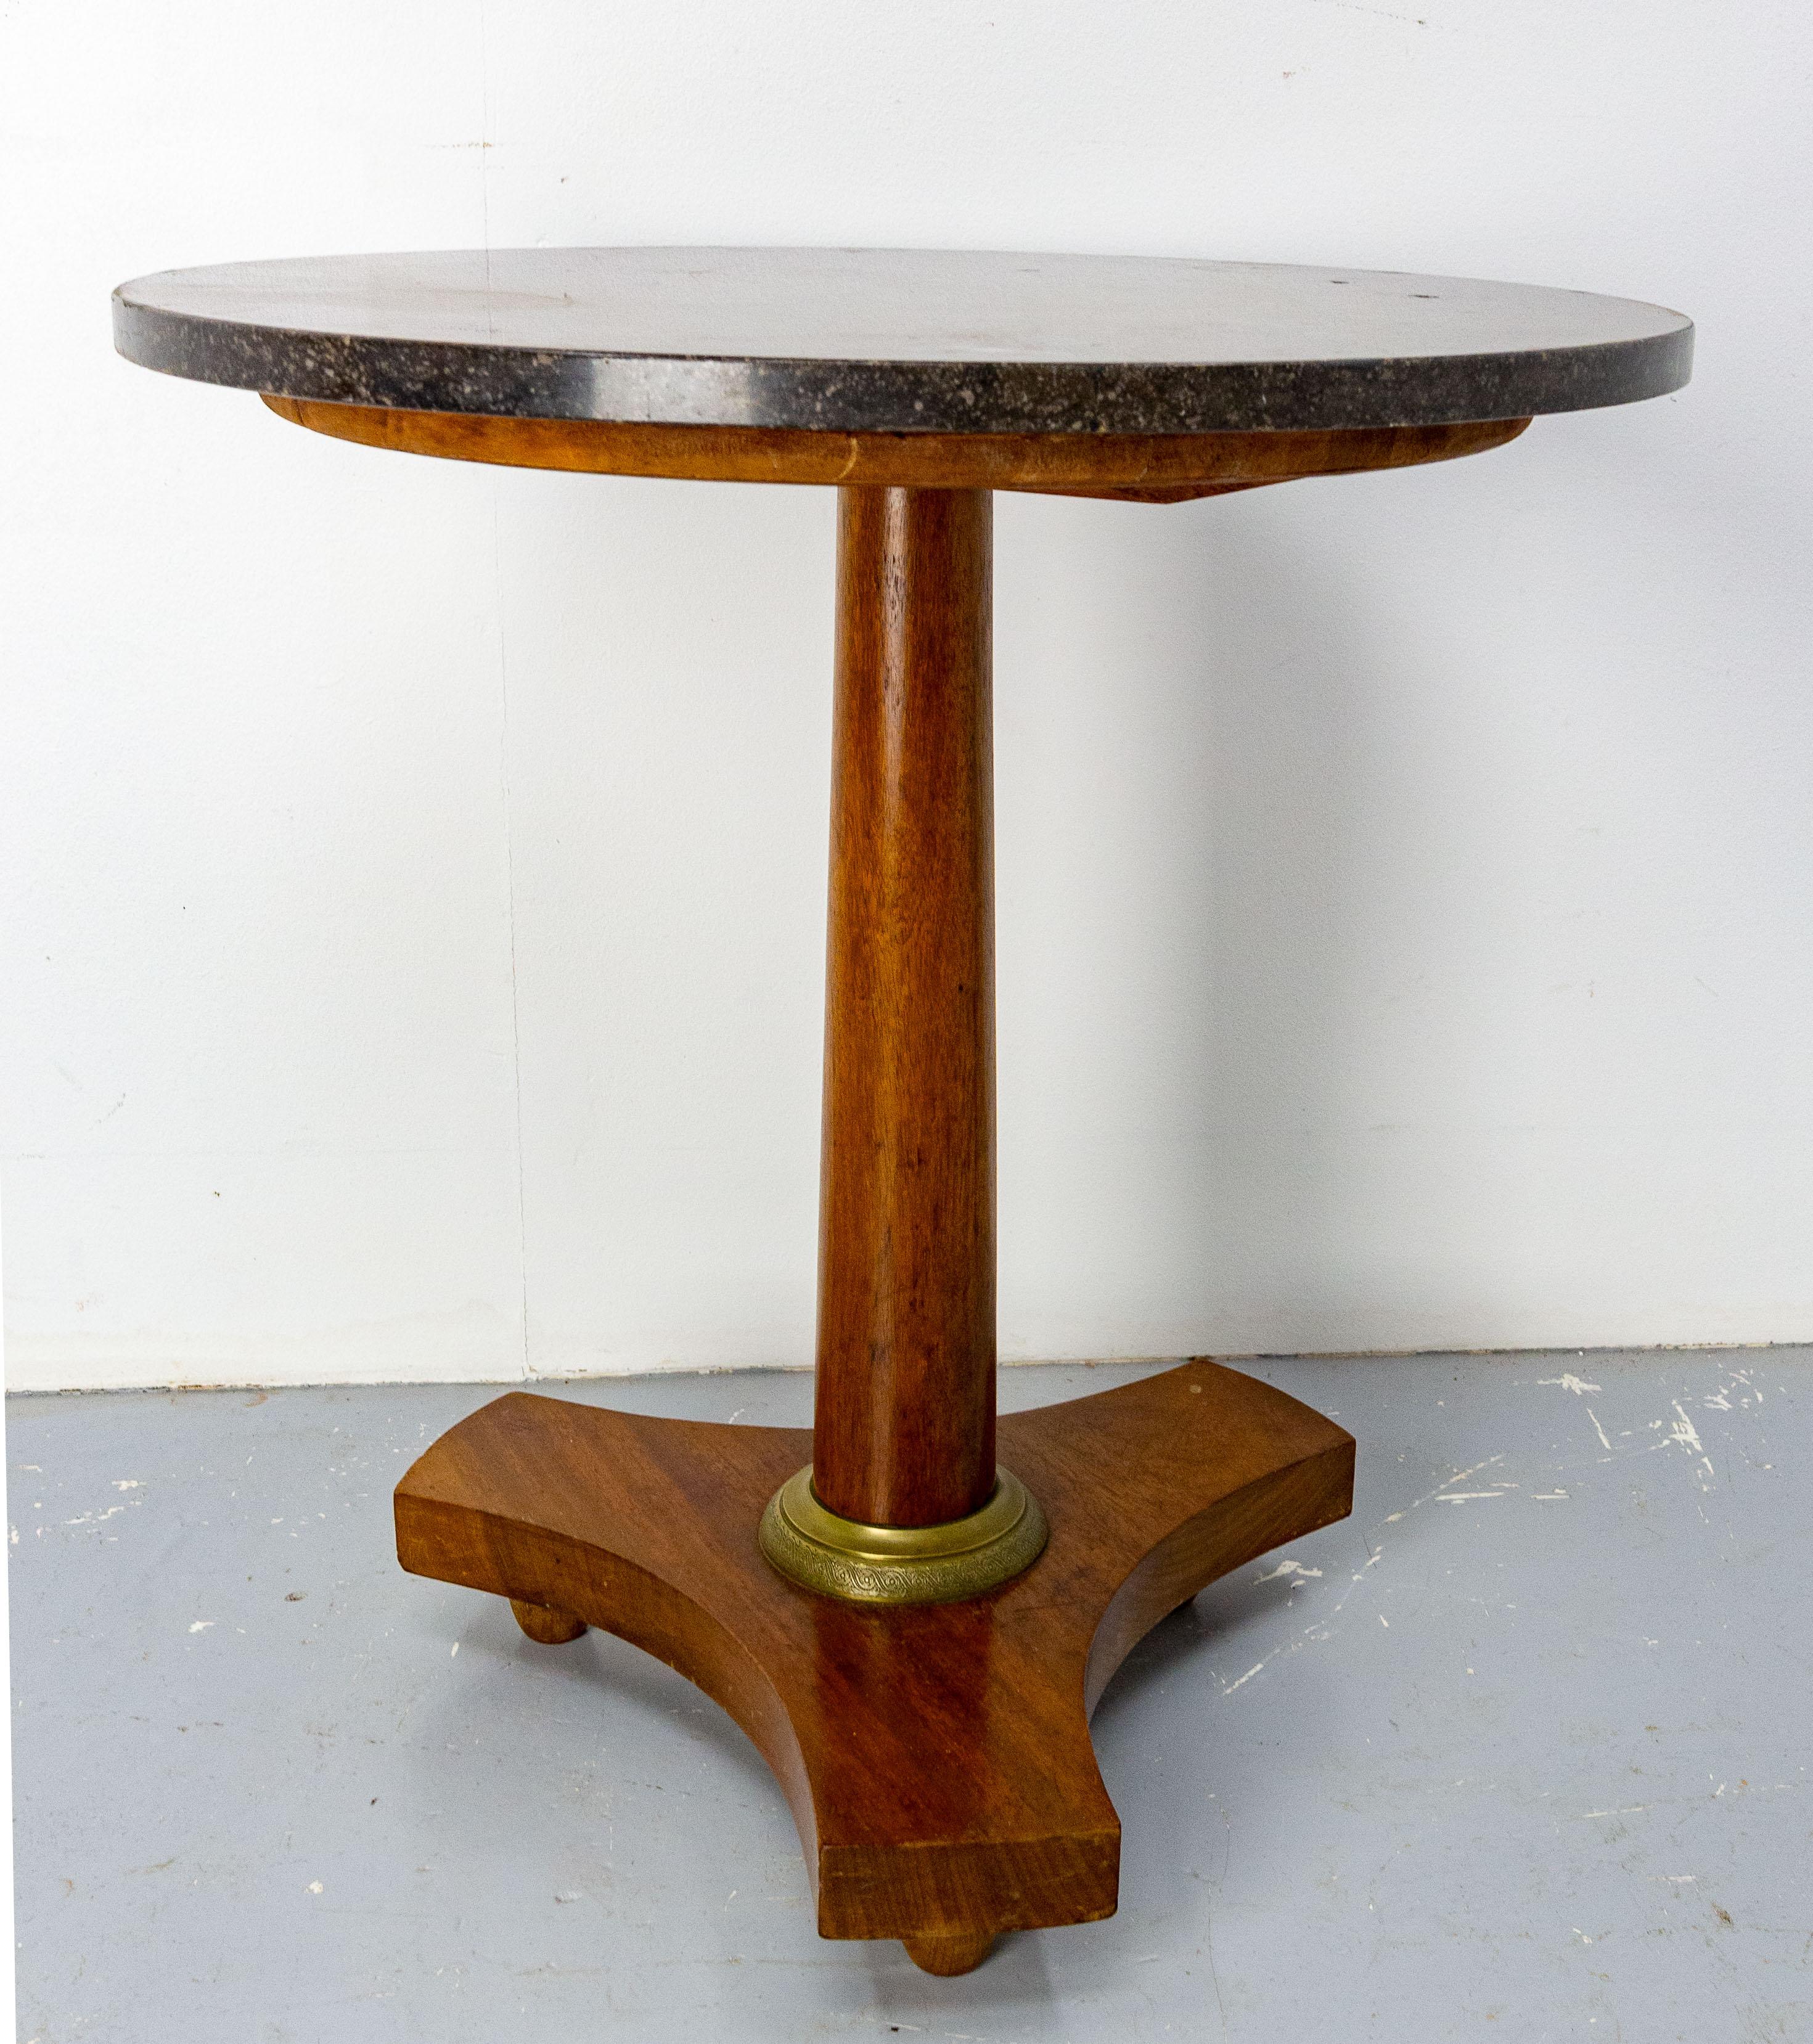 Little table, sellette side or end table in the Empire style.
Massive mahogany and marble.
The marble was broken and very properly glued.

Made circa 1960
Good condition, few marks of use on the marble.


